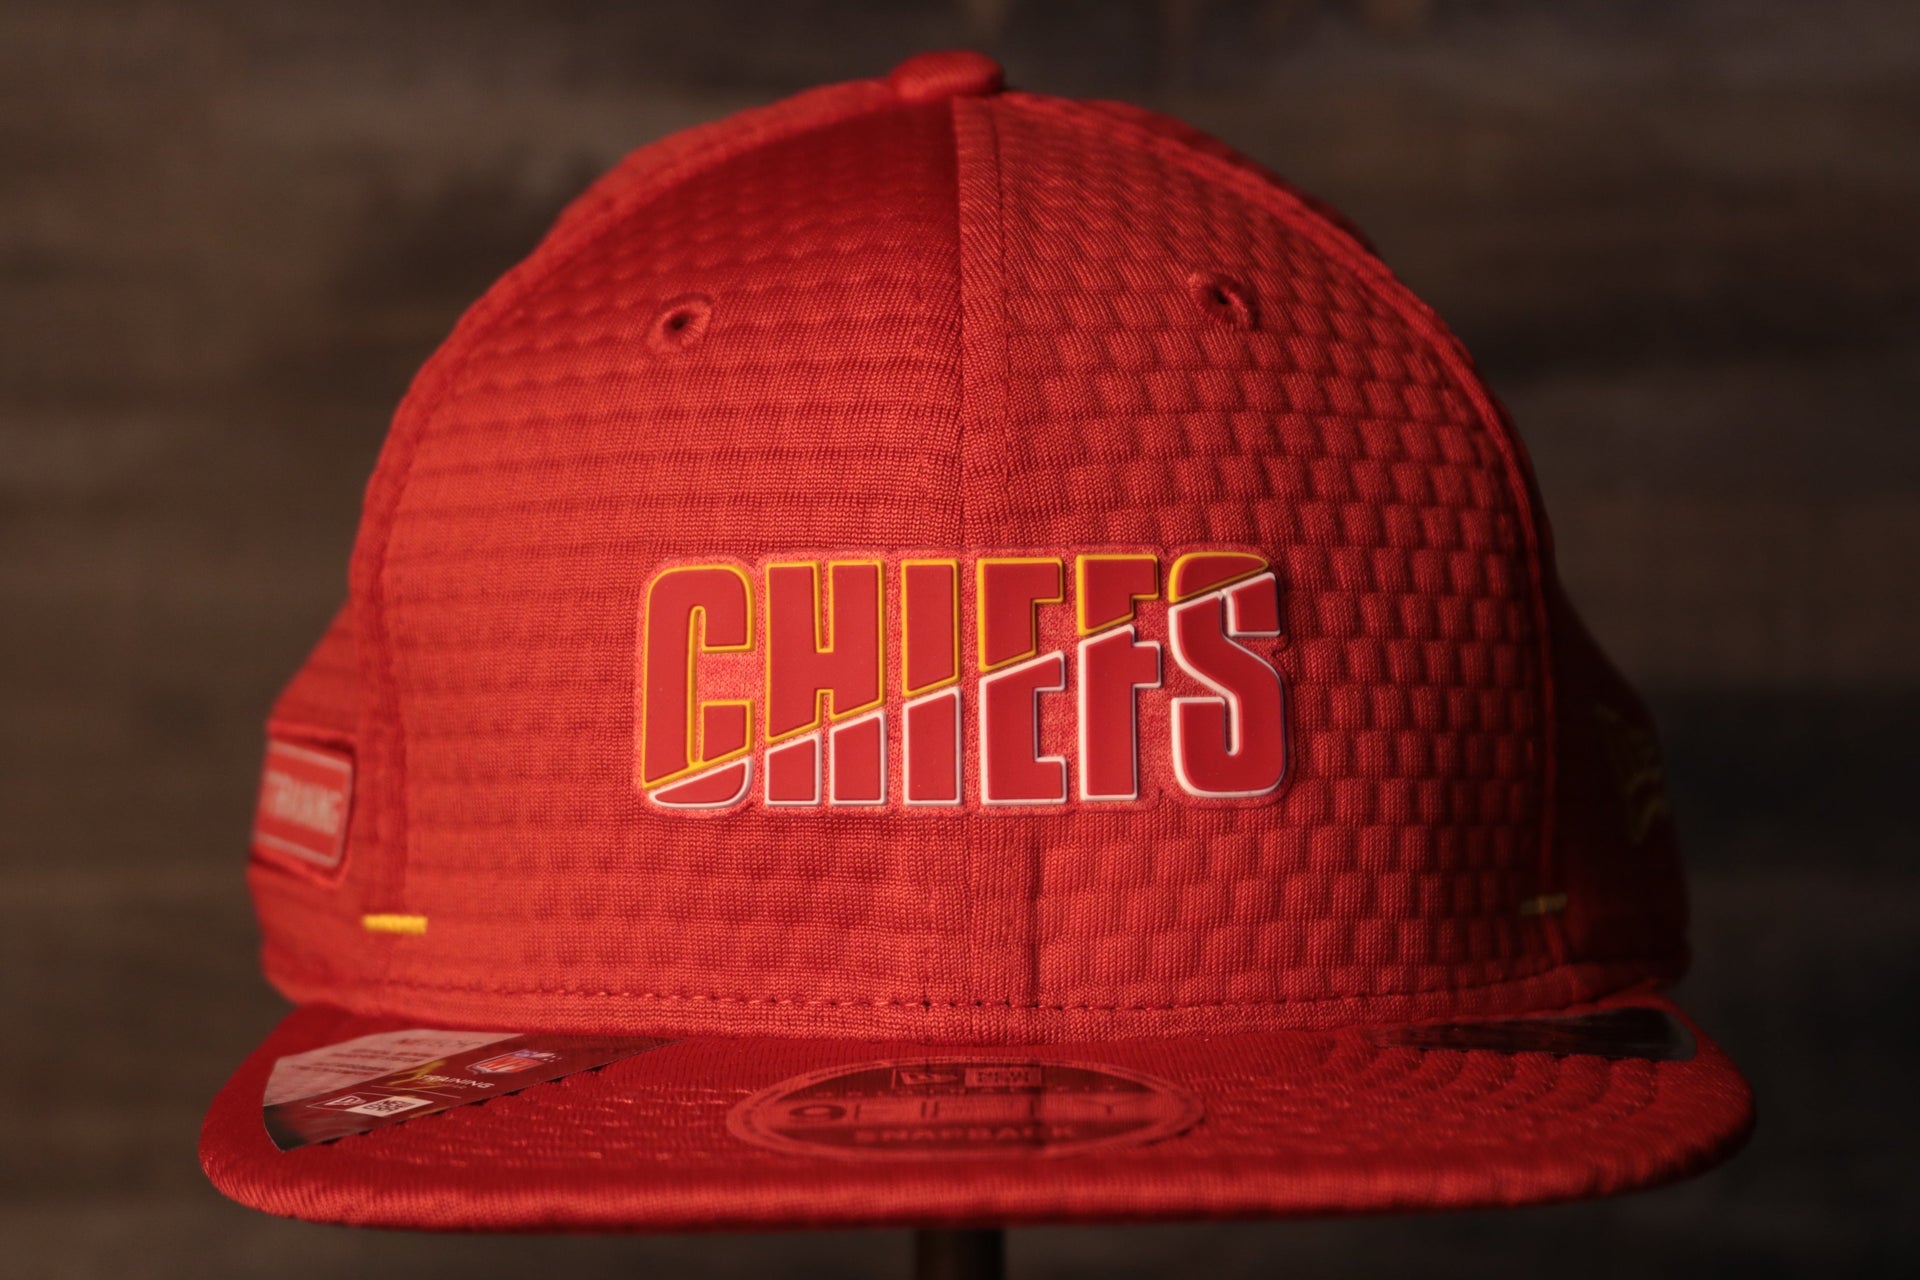 Chiefs 2020 Training Camp Snapback Hat | Kansas City Chiefs 2020 On-Field Red Training Camp Snap Cap the front of this chiefs hats has the chiefs name on it